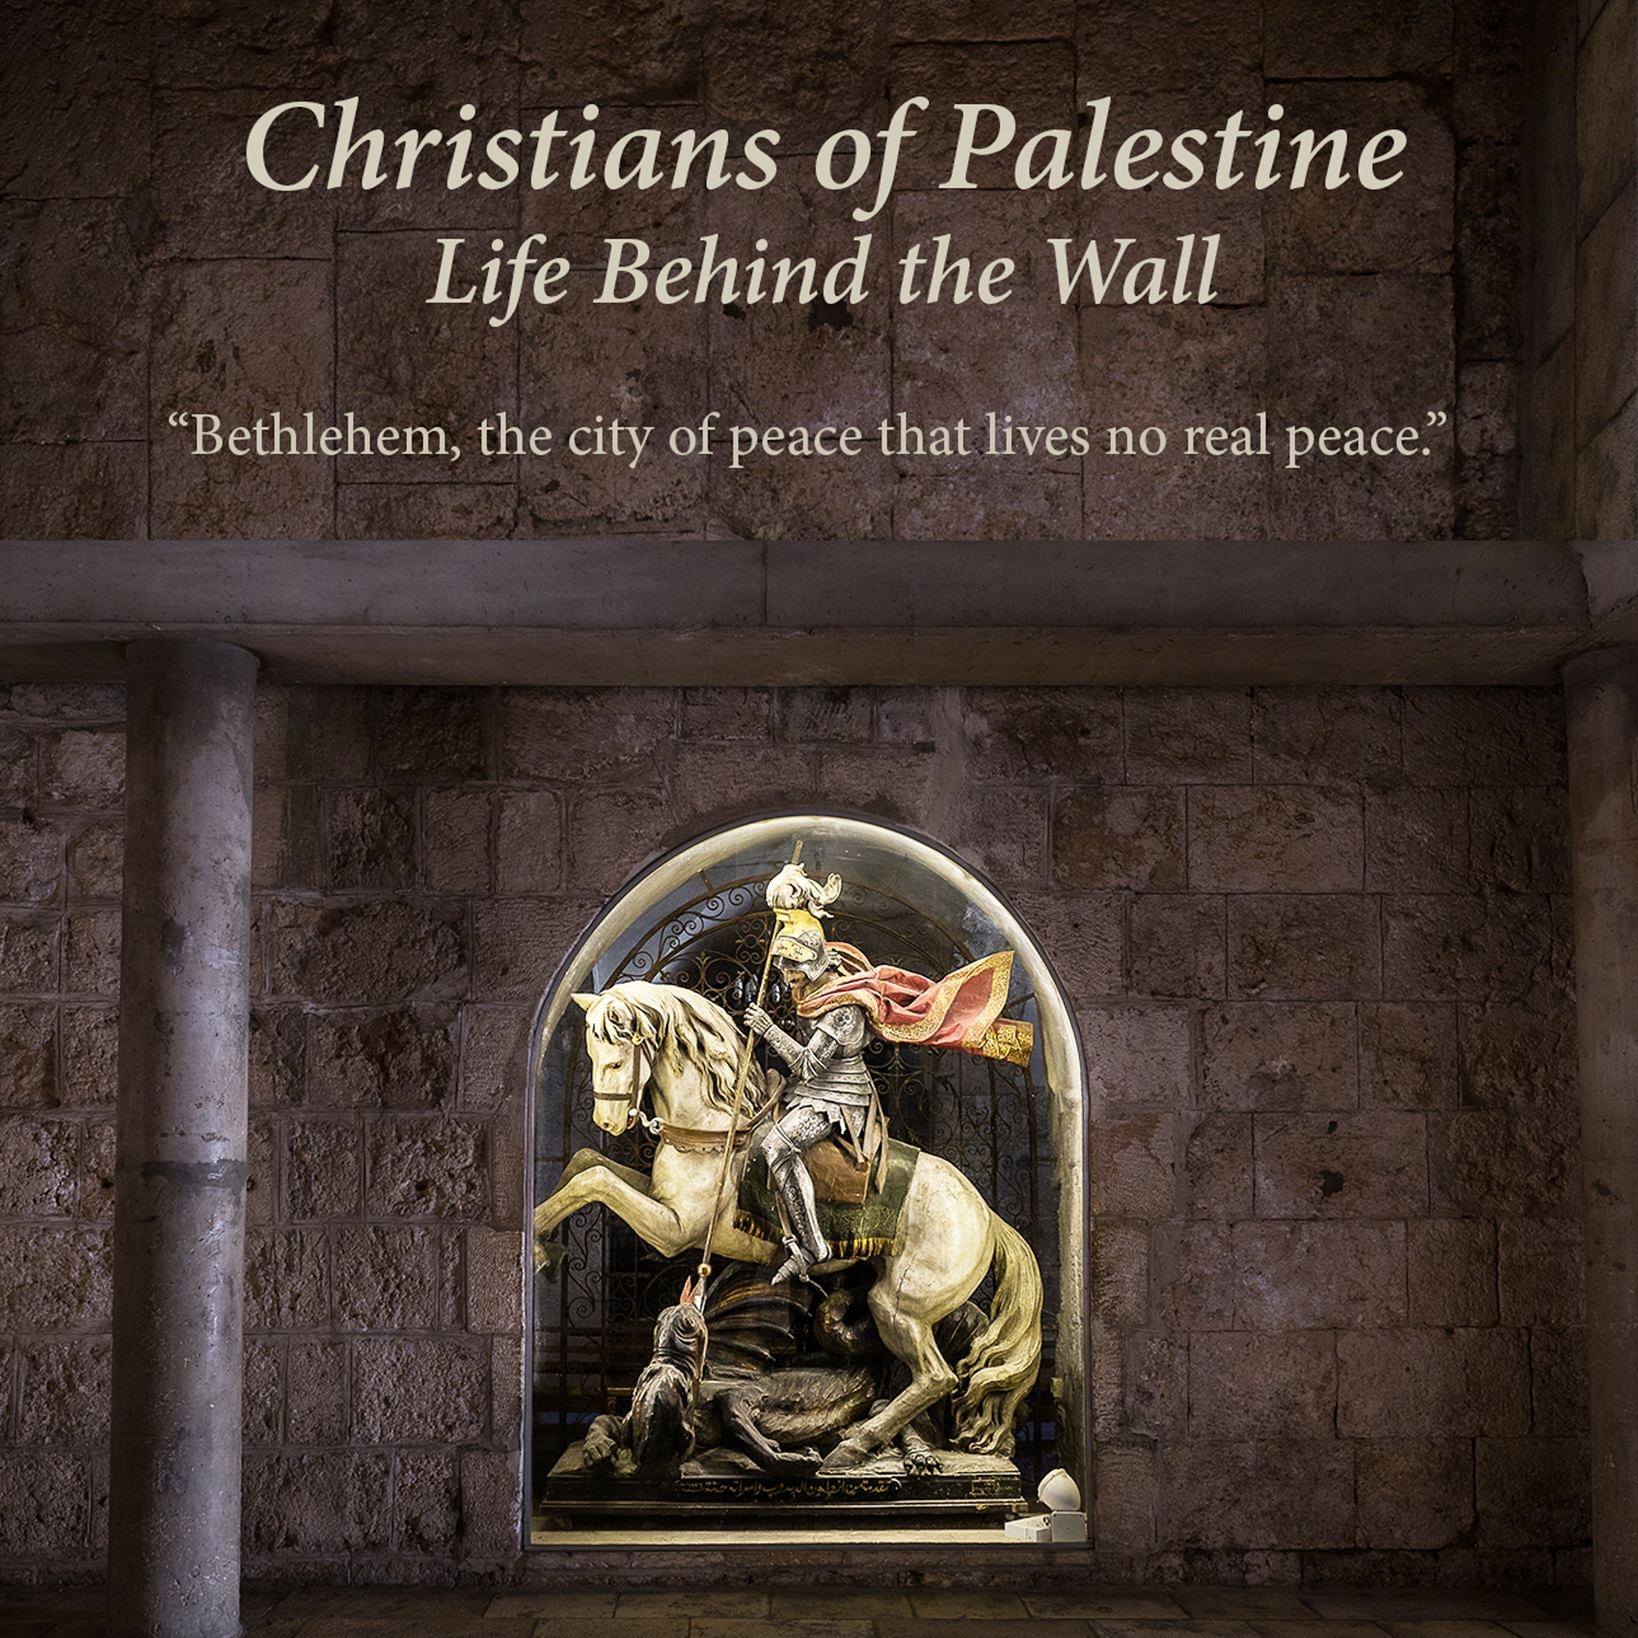 Christians_of_Palestine_Life_Behind_the_Wall.jpg